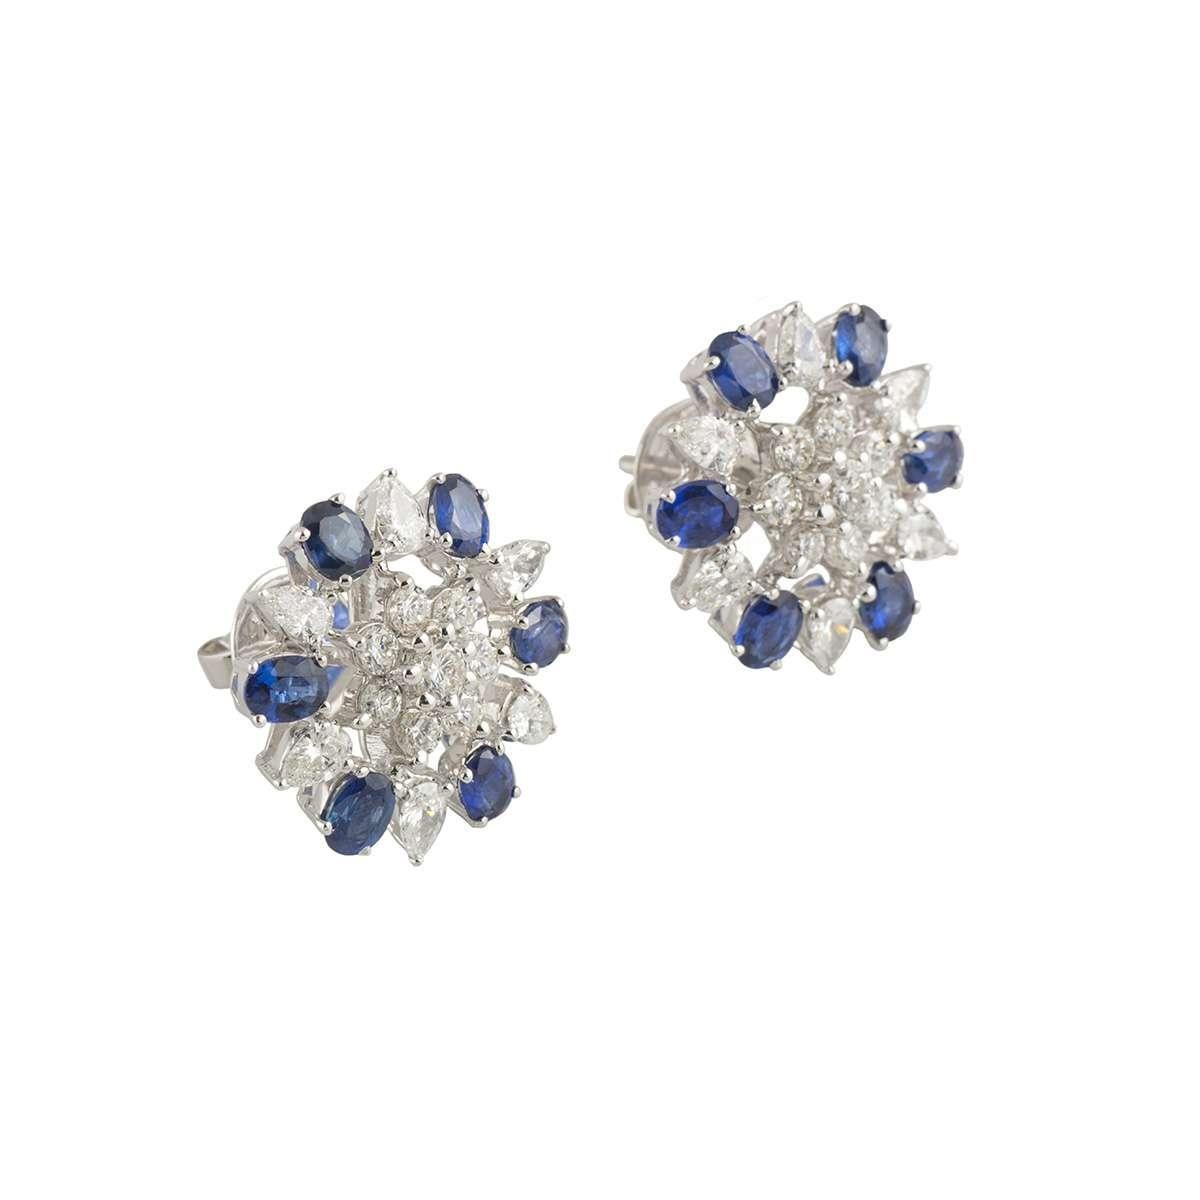 A pretty pair of 18k white gold diamond and sapphire stud earrings. The earrings comprise of a flower motif with 1 round brilliant cut diamond in the centre and 7 round brilliant cut diamonds. Complementing the flower motif are a halo of oval cut